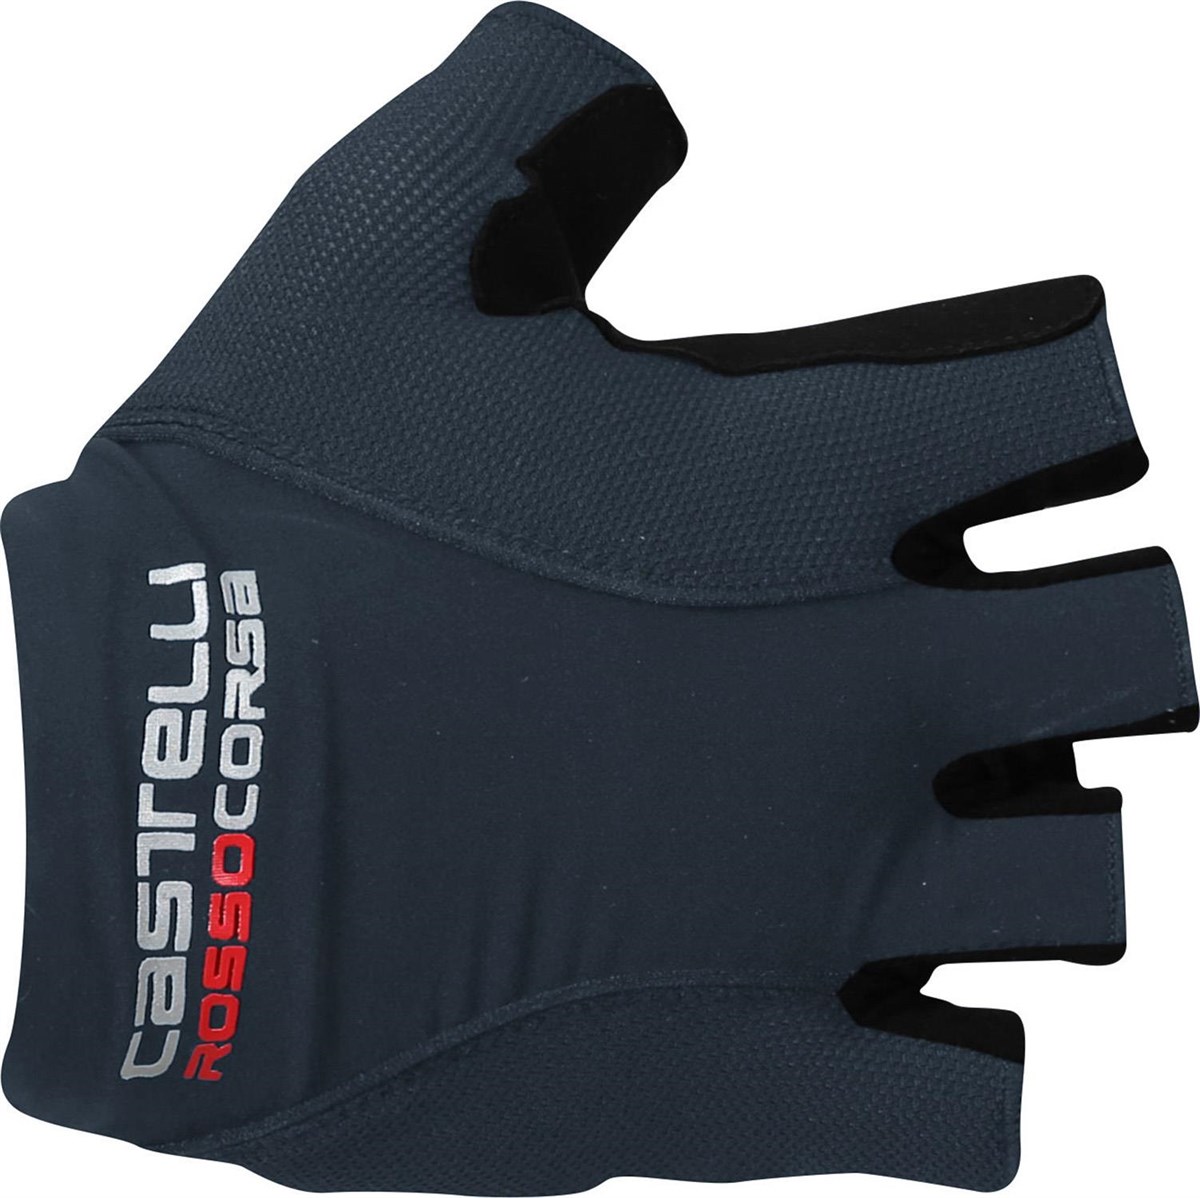 Castelli Rosso Corsa Pave Short Fing Cycling Gloves product image